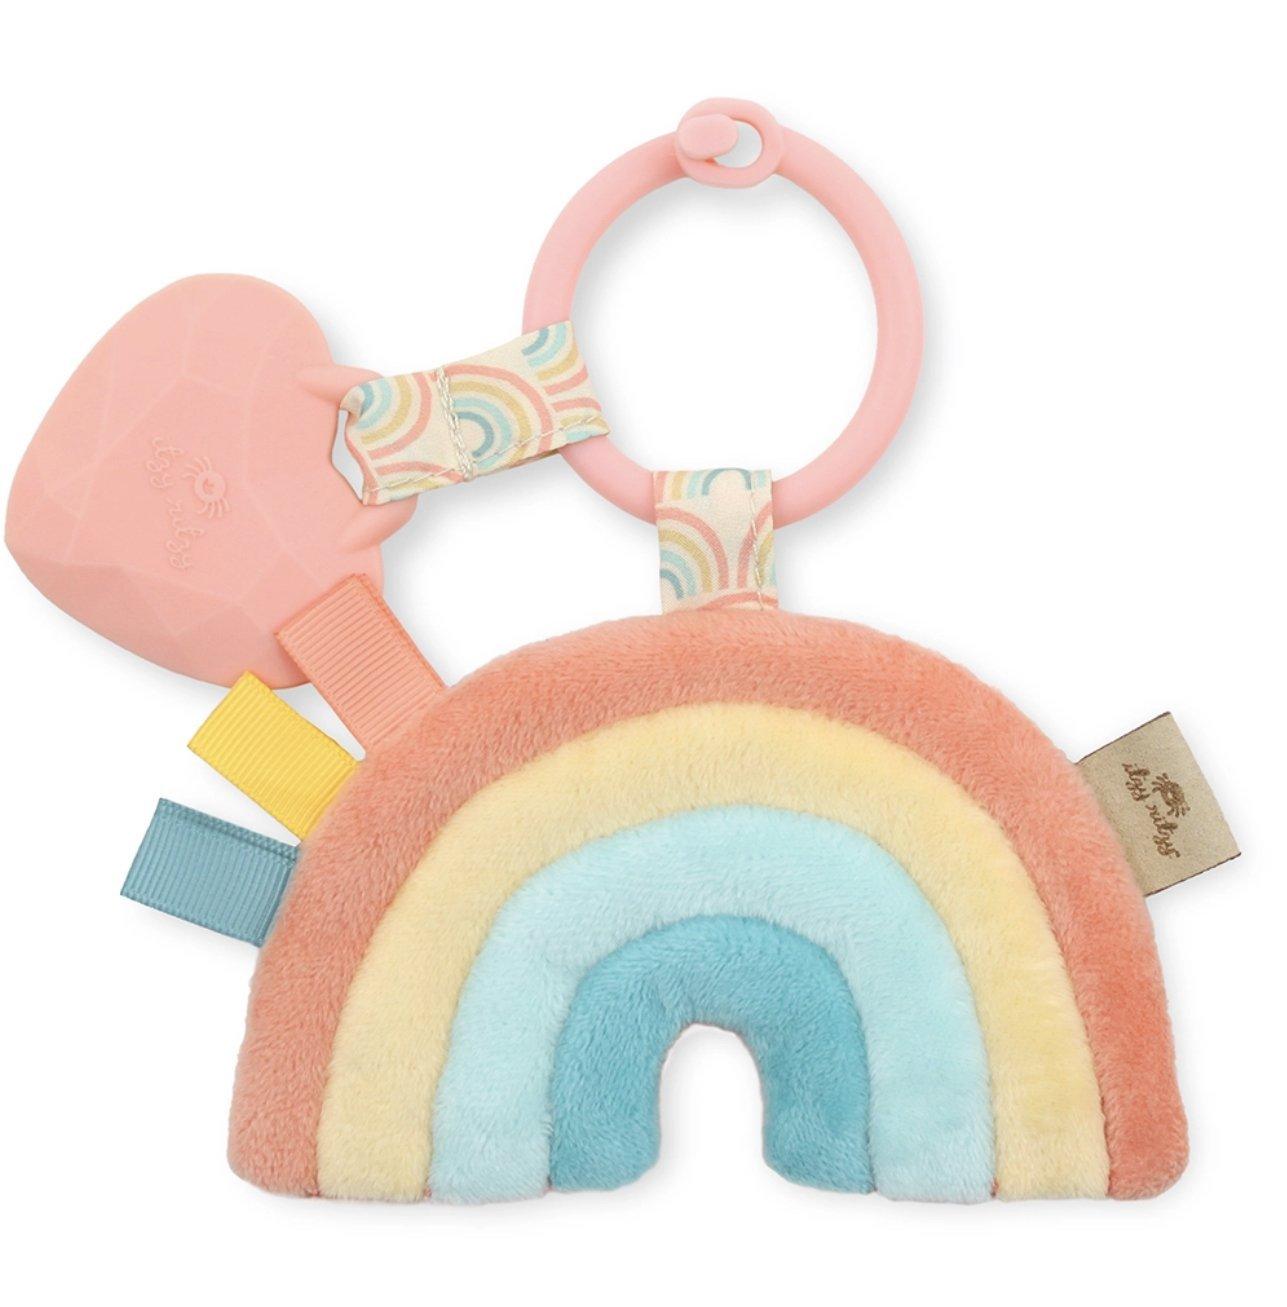 NEW Itzy Pal Plush + Teether Baby in Styles